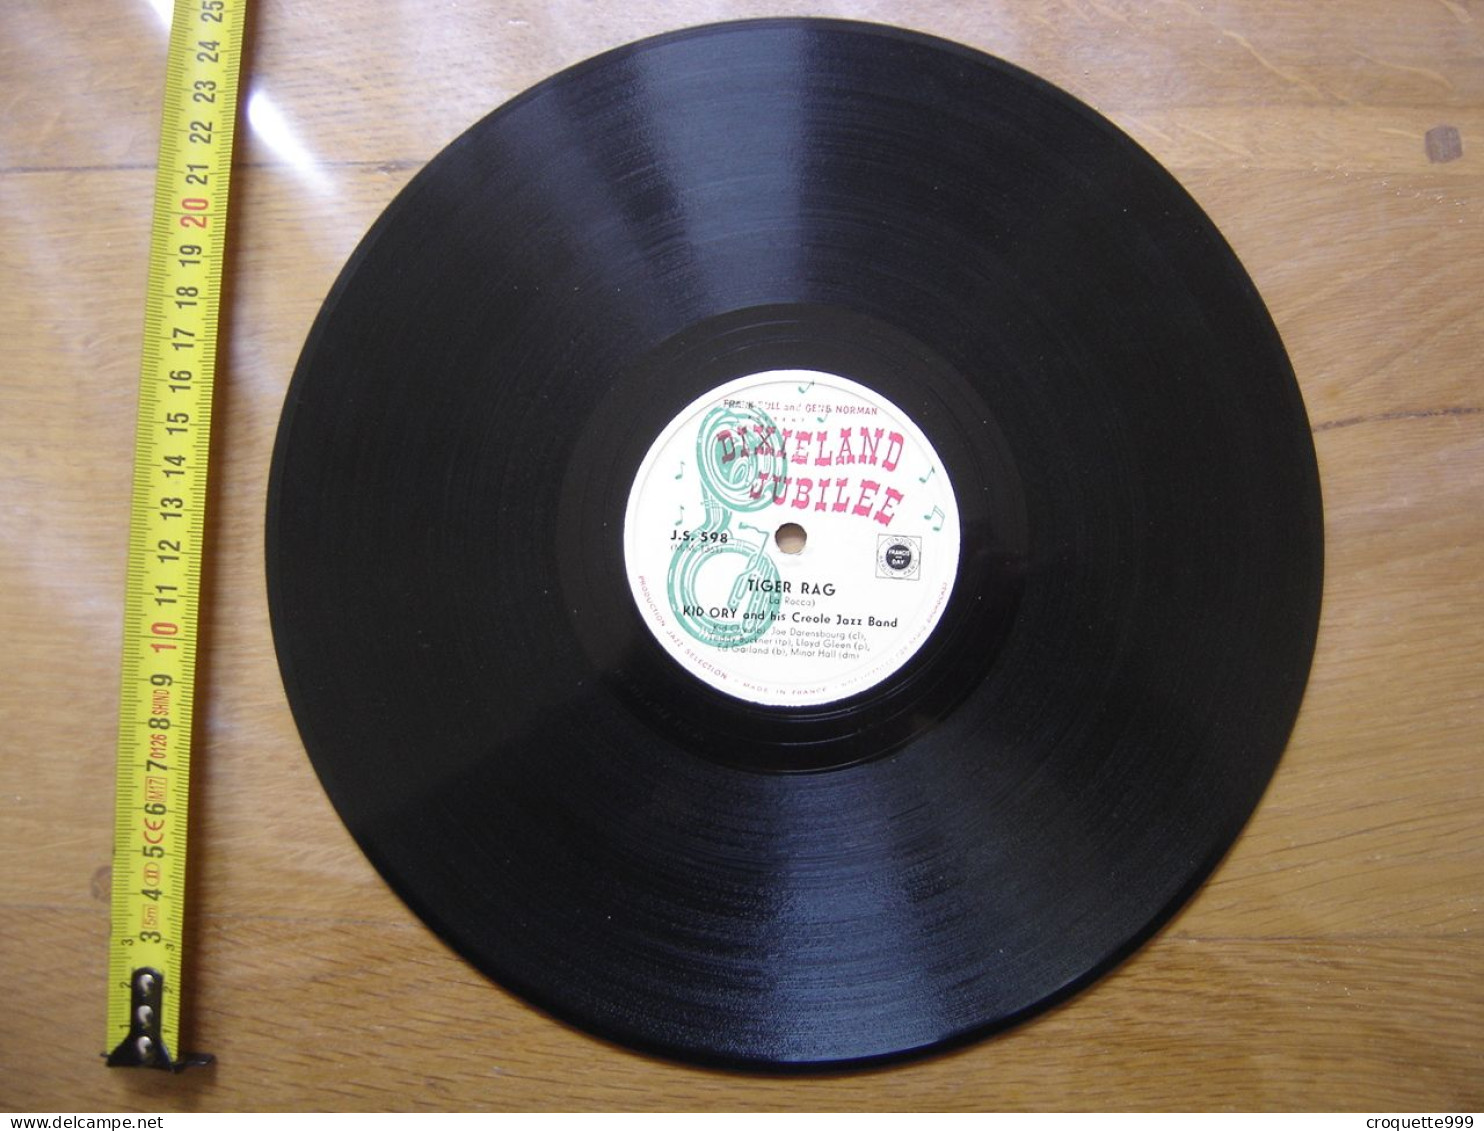 Disque 78 Tours 25 Cm KID ORY And His Creole Jazz Band Dixieland Jubilee J.S. 598 TIGER RAG EH LA BAS - 78 Rpm - Schellackplatten